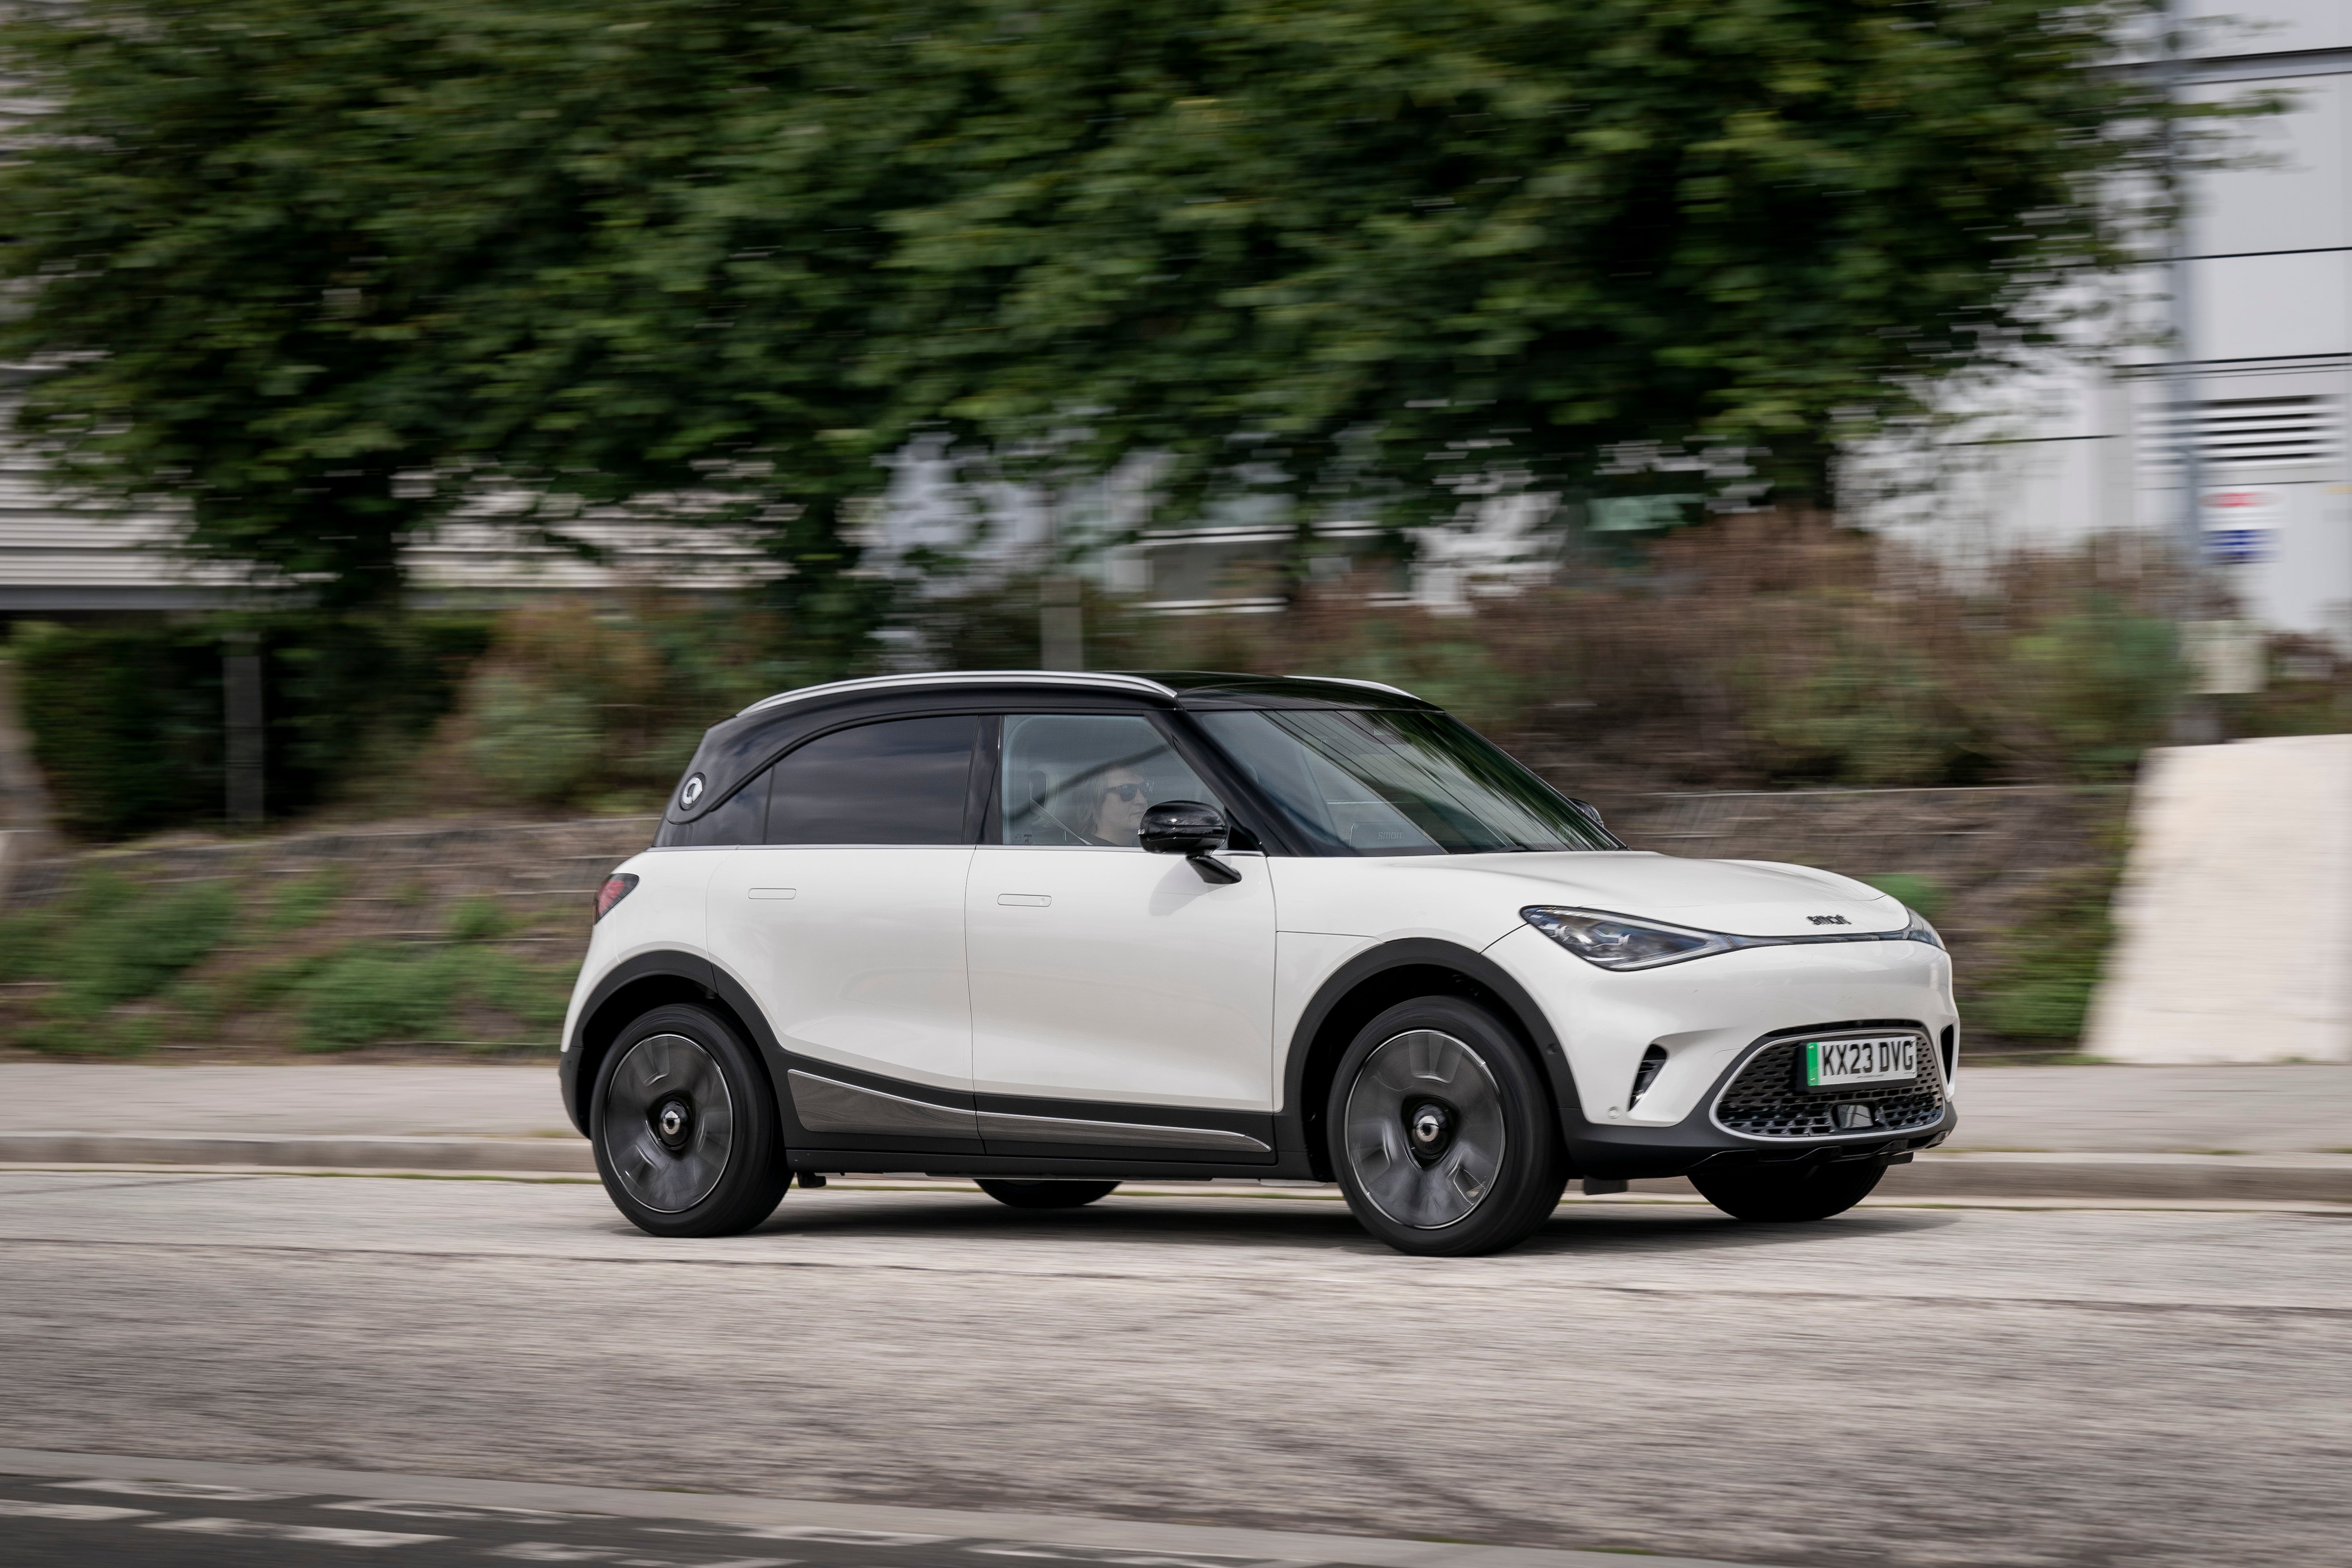 One of the new breeds of very compact SUVs – huge by the idealistic standards of the old Smart car